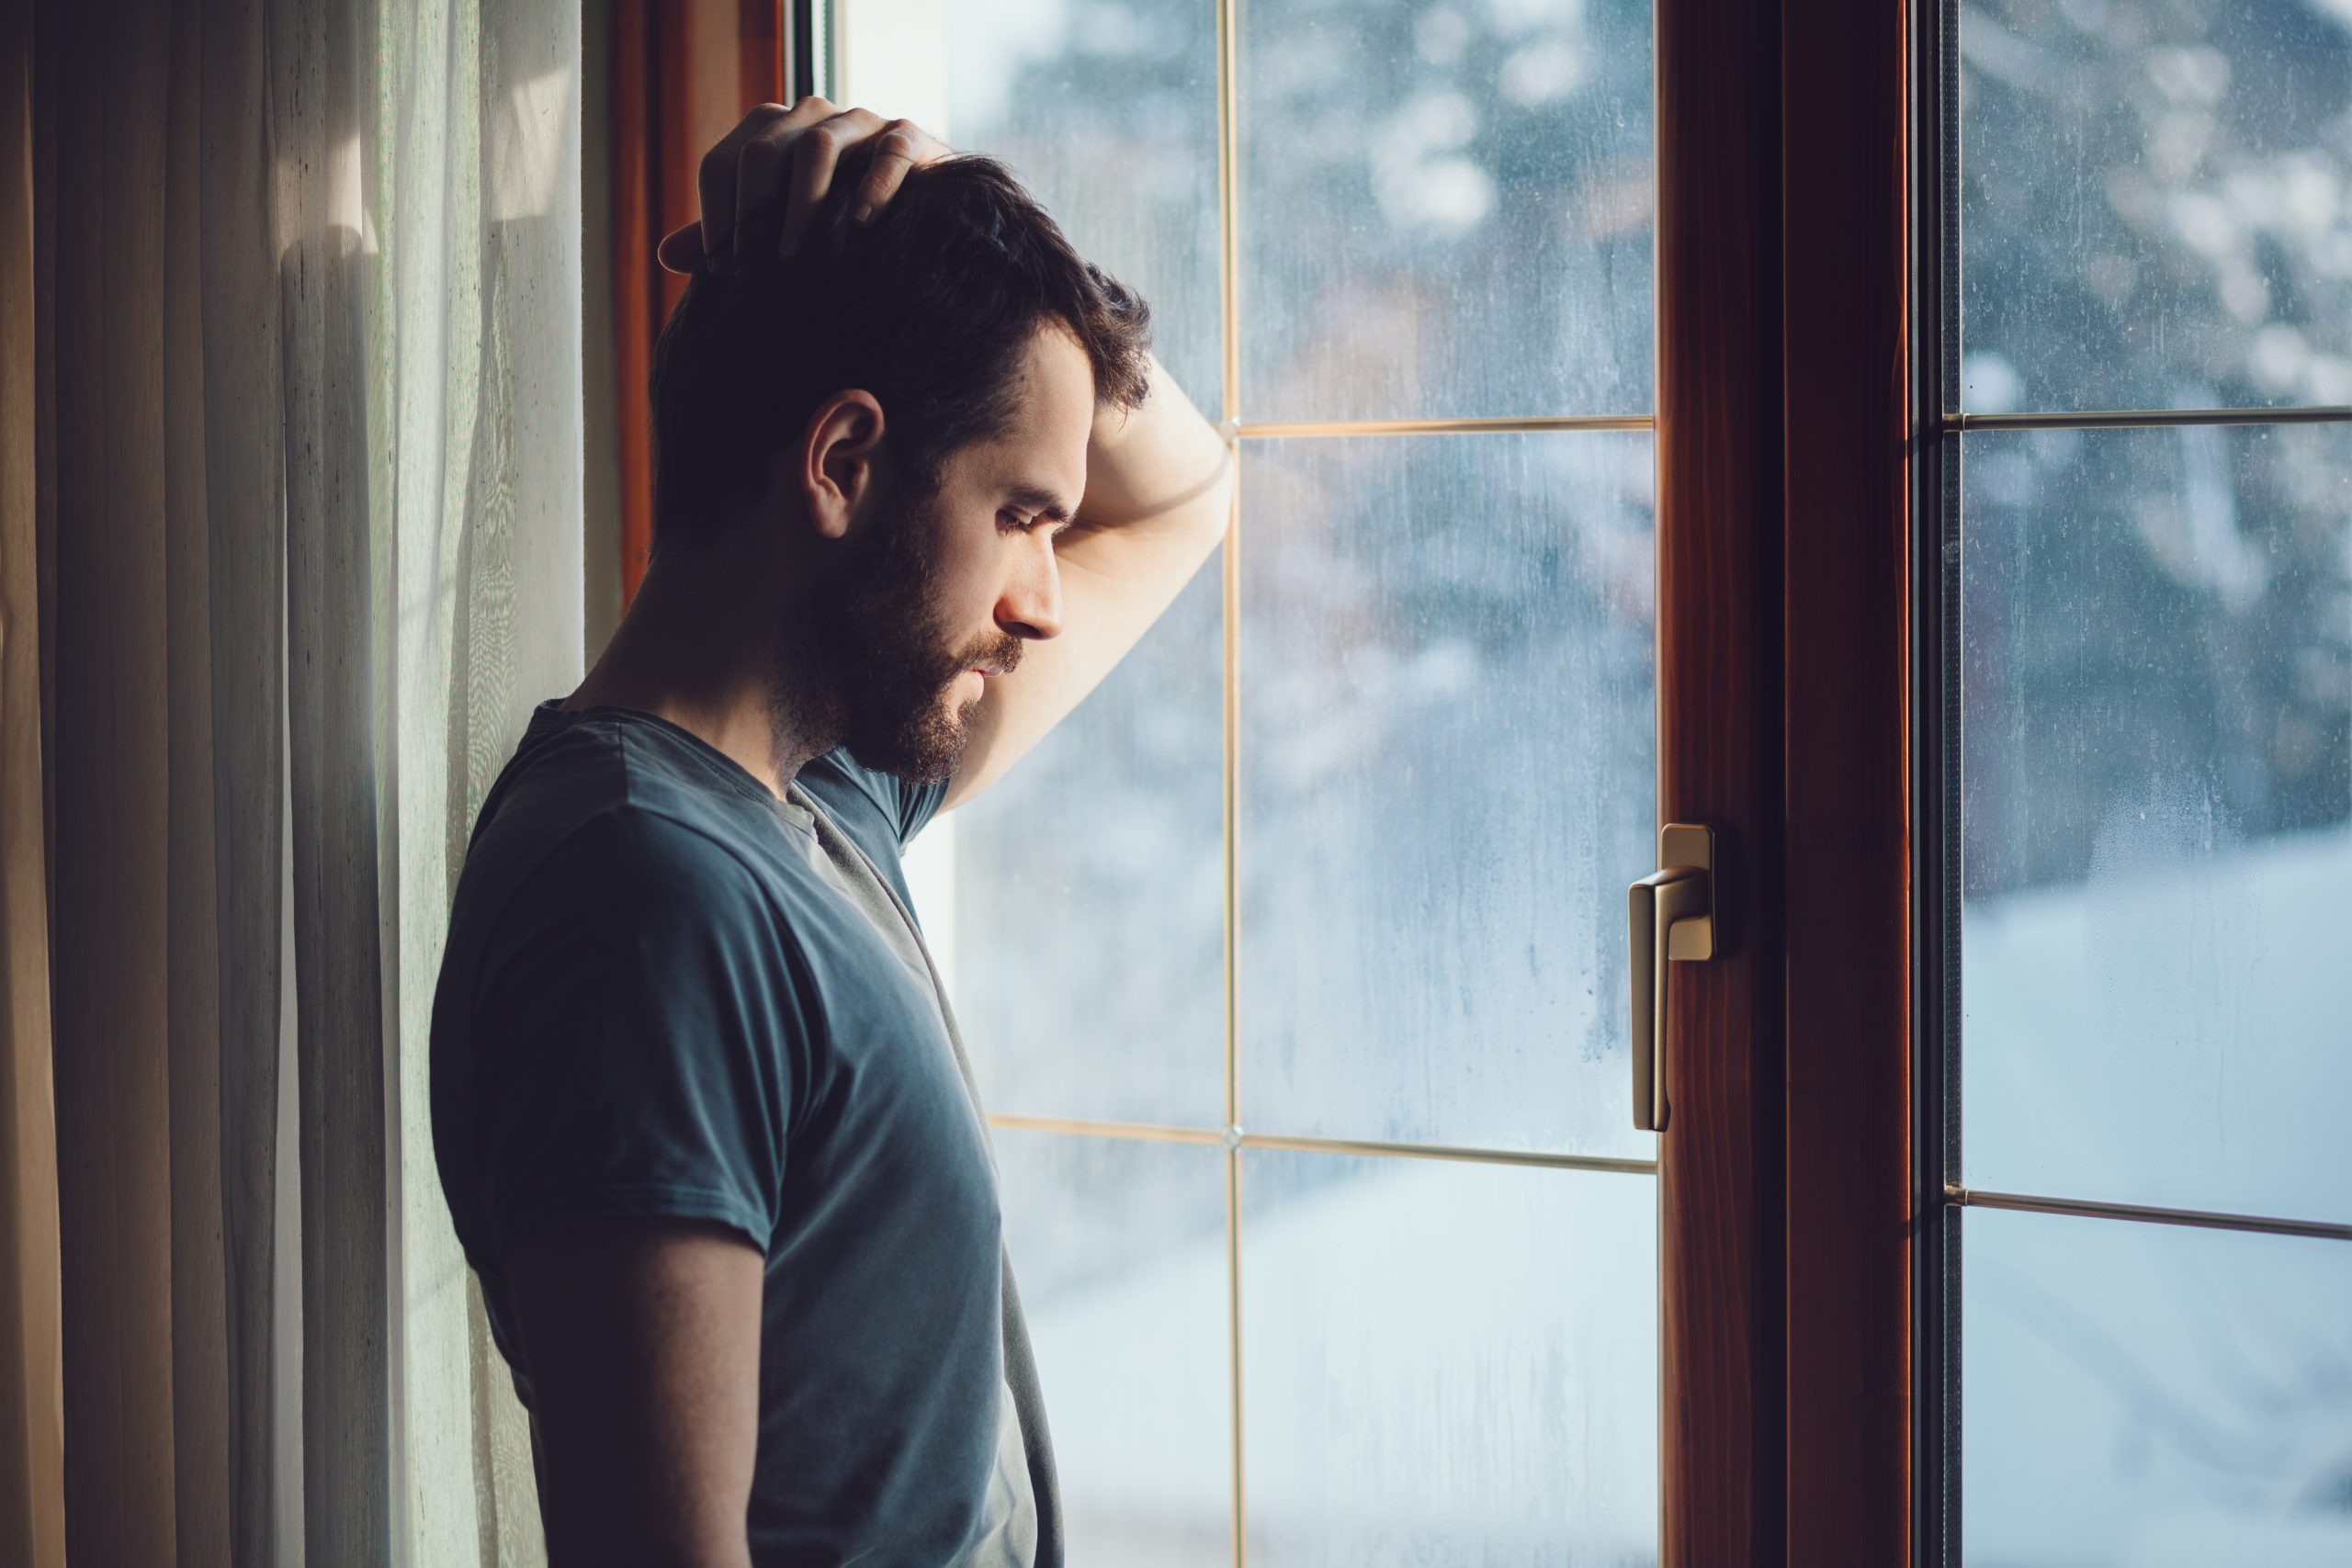 Man looking forlorn next to a window